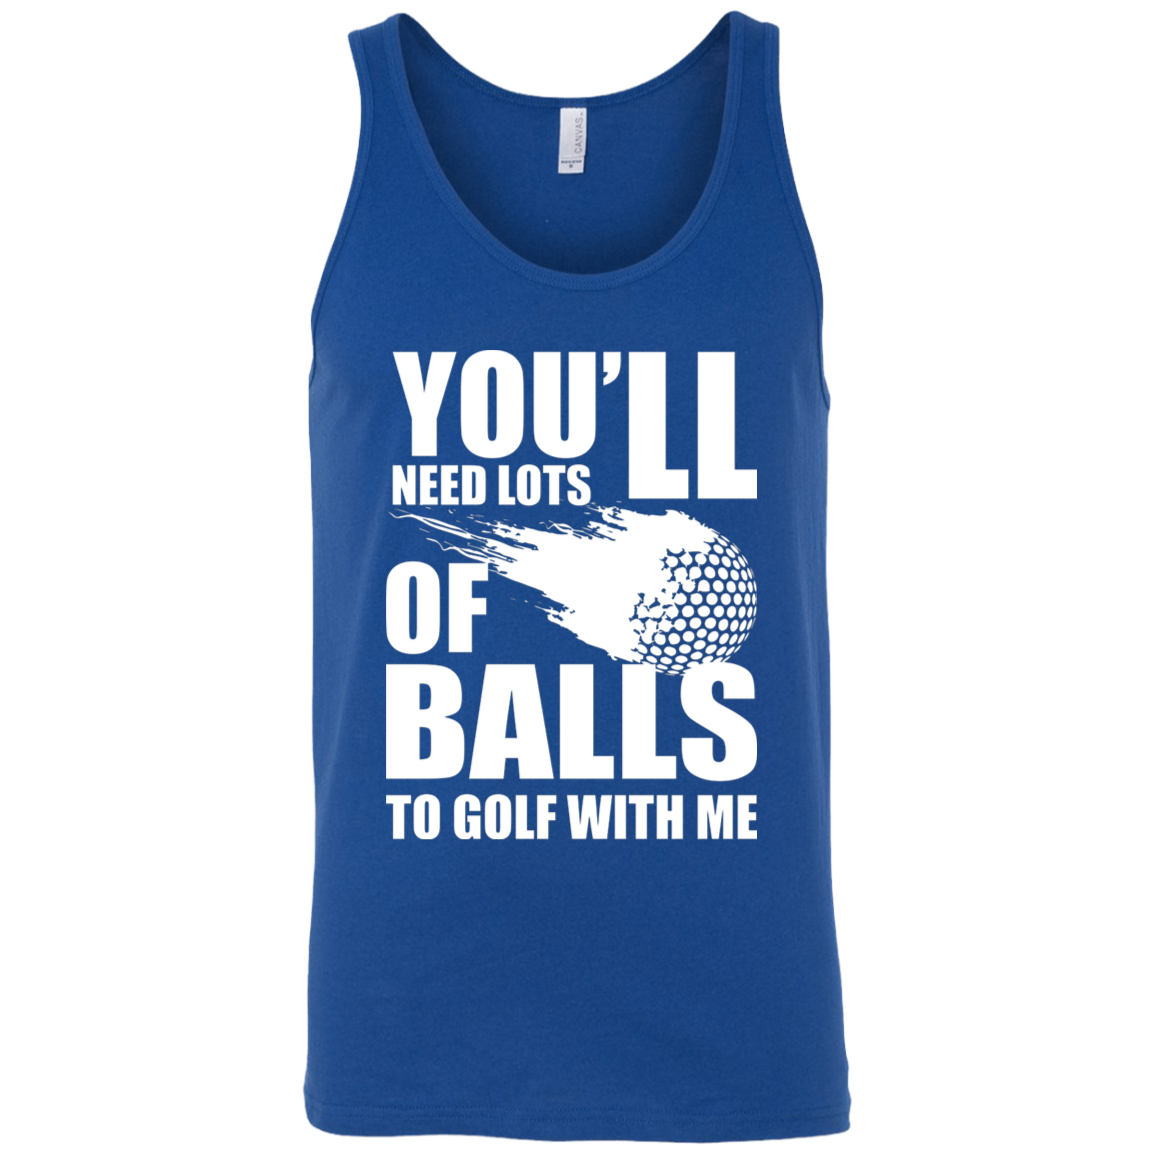 You'll Need Lots Of Balls To Golf With Me Tank Top Apparel - The Beer Lodge